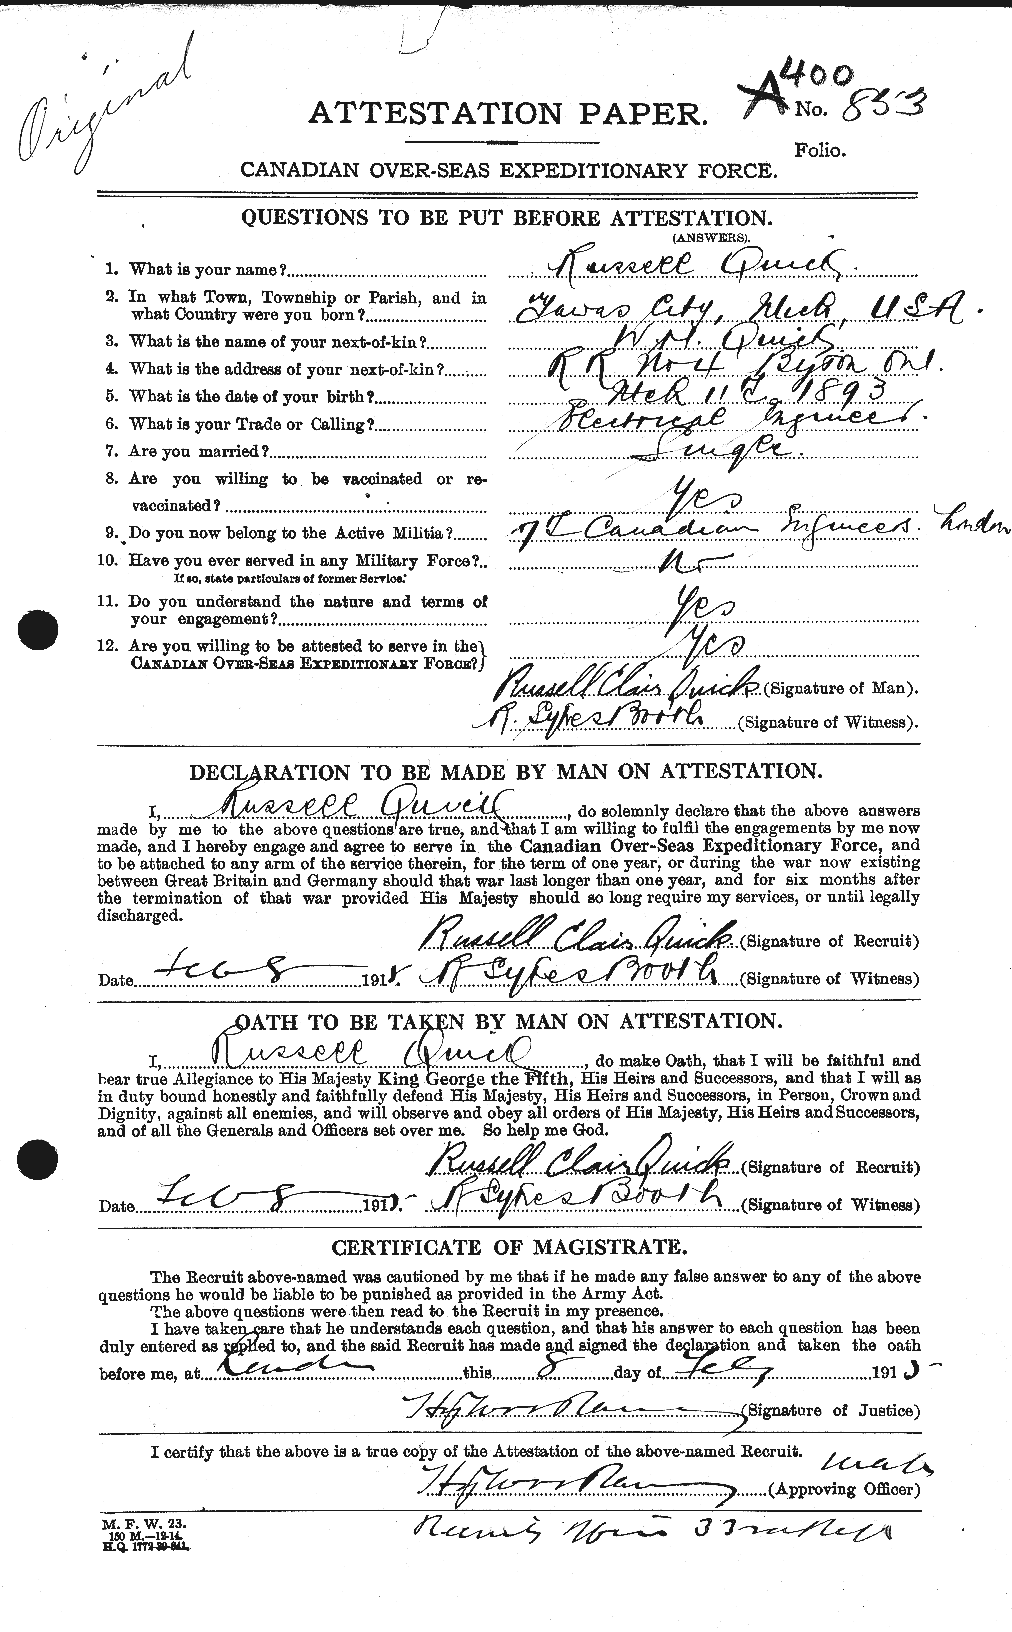 Personnel Records of the First World War - CEF 592999a